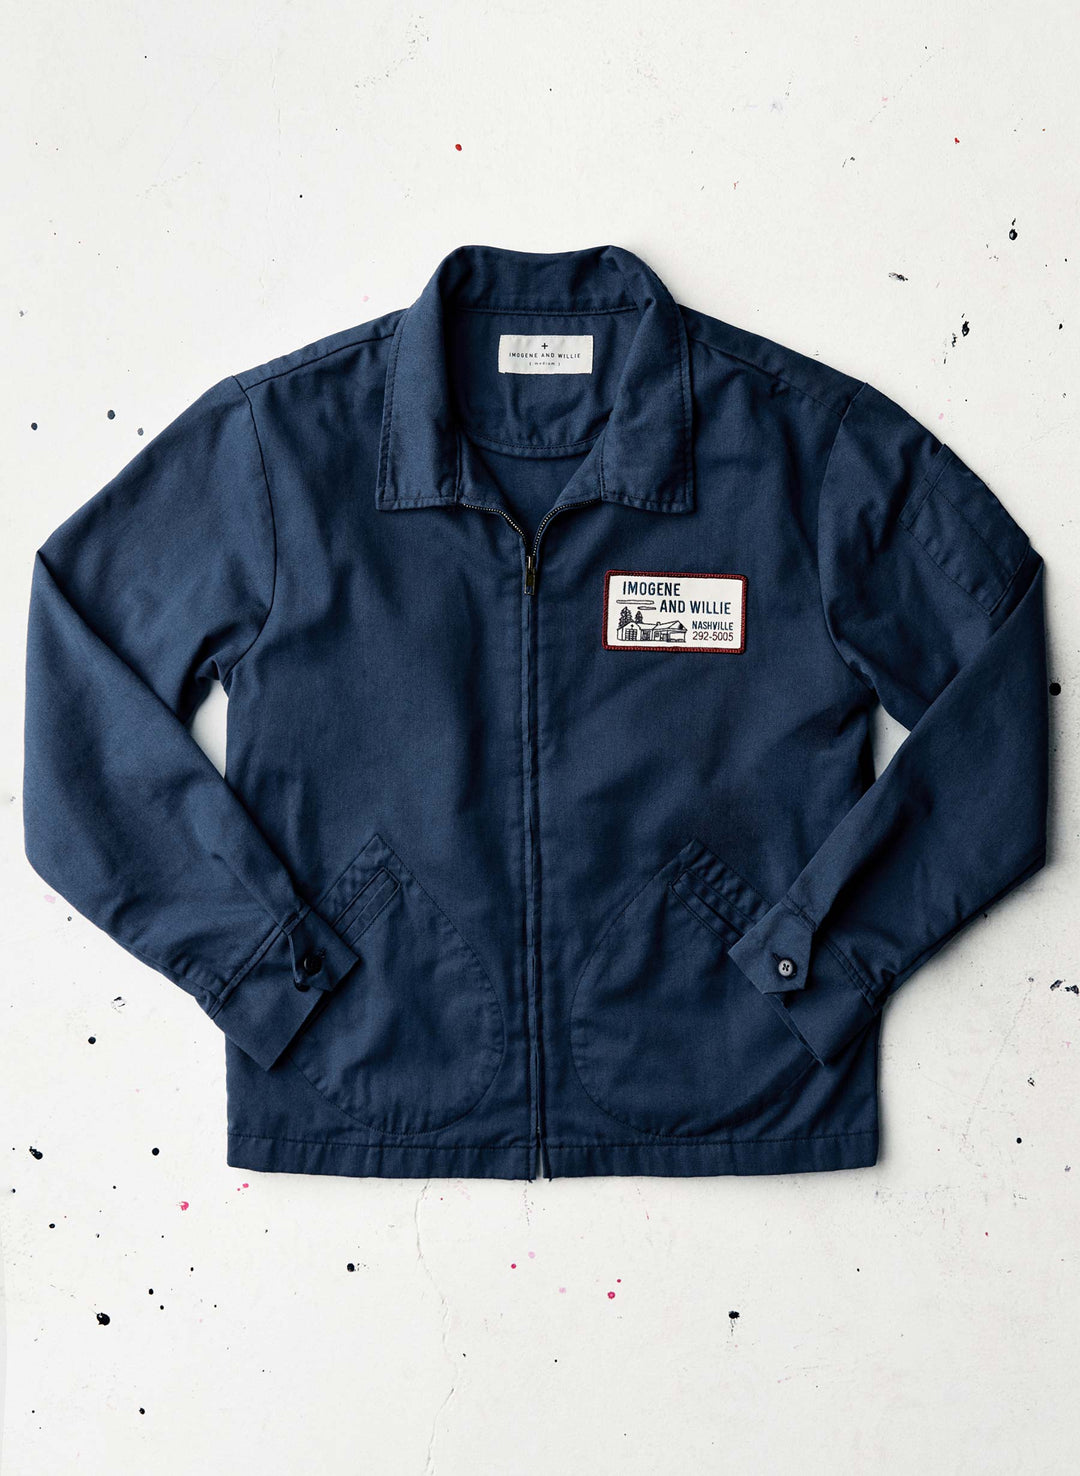 a jacket with a name tag